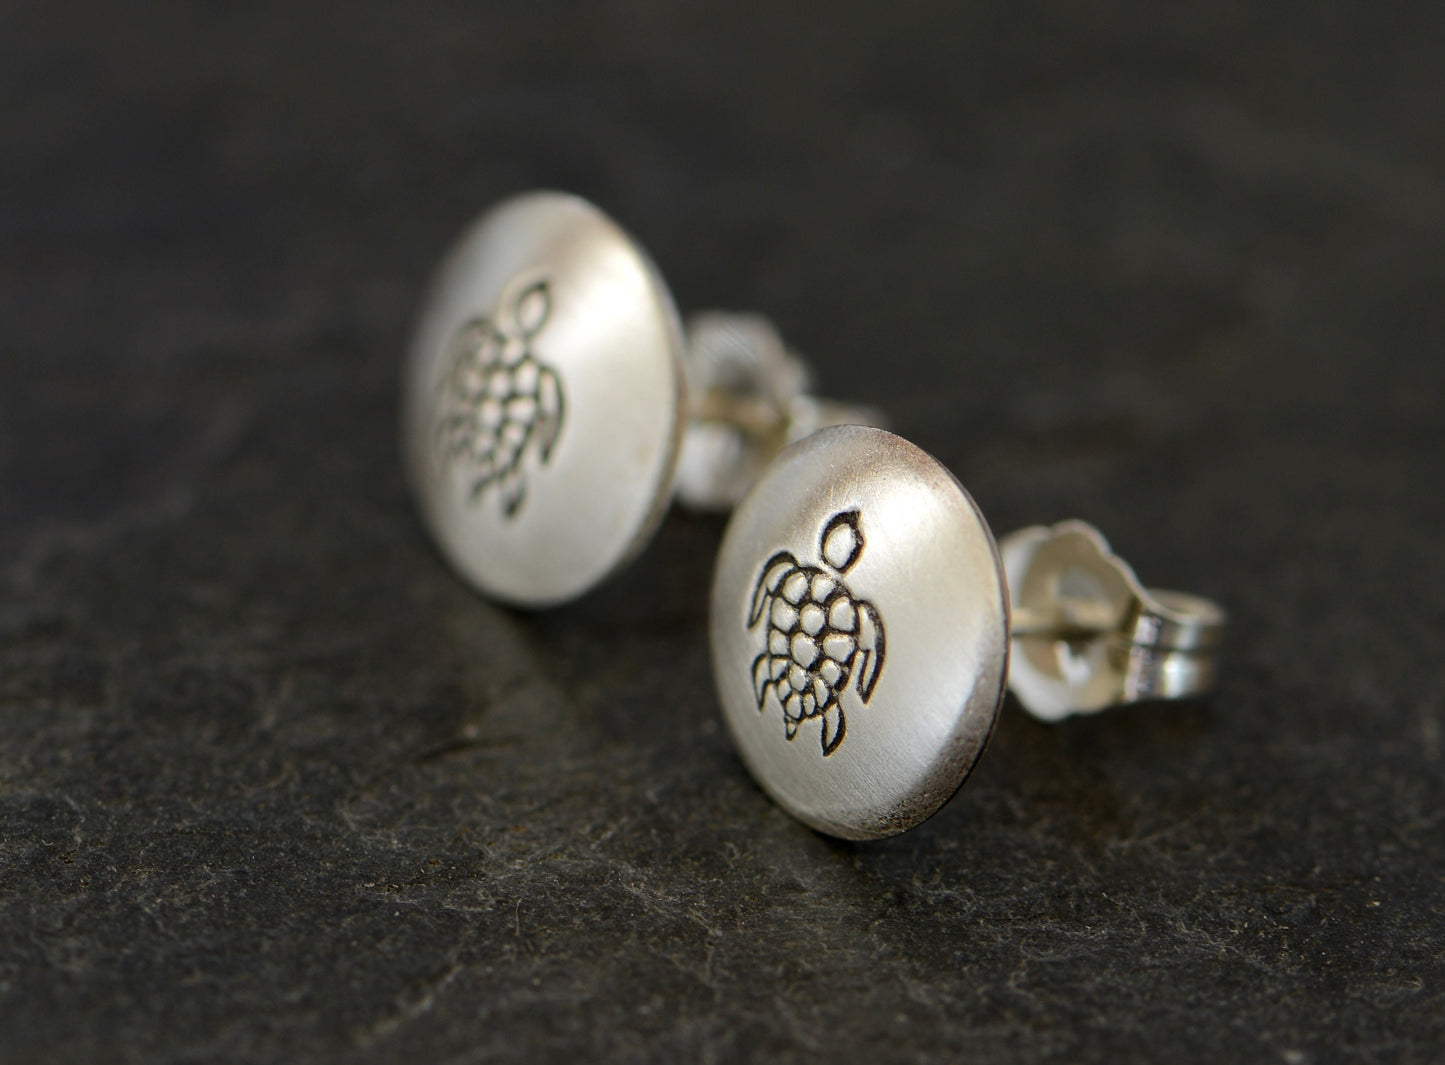 Button style earrings with sea turtle designs in sterling silver